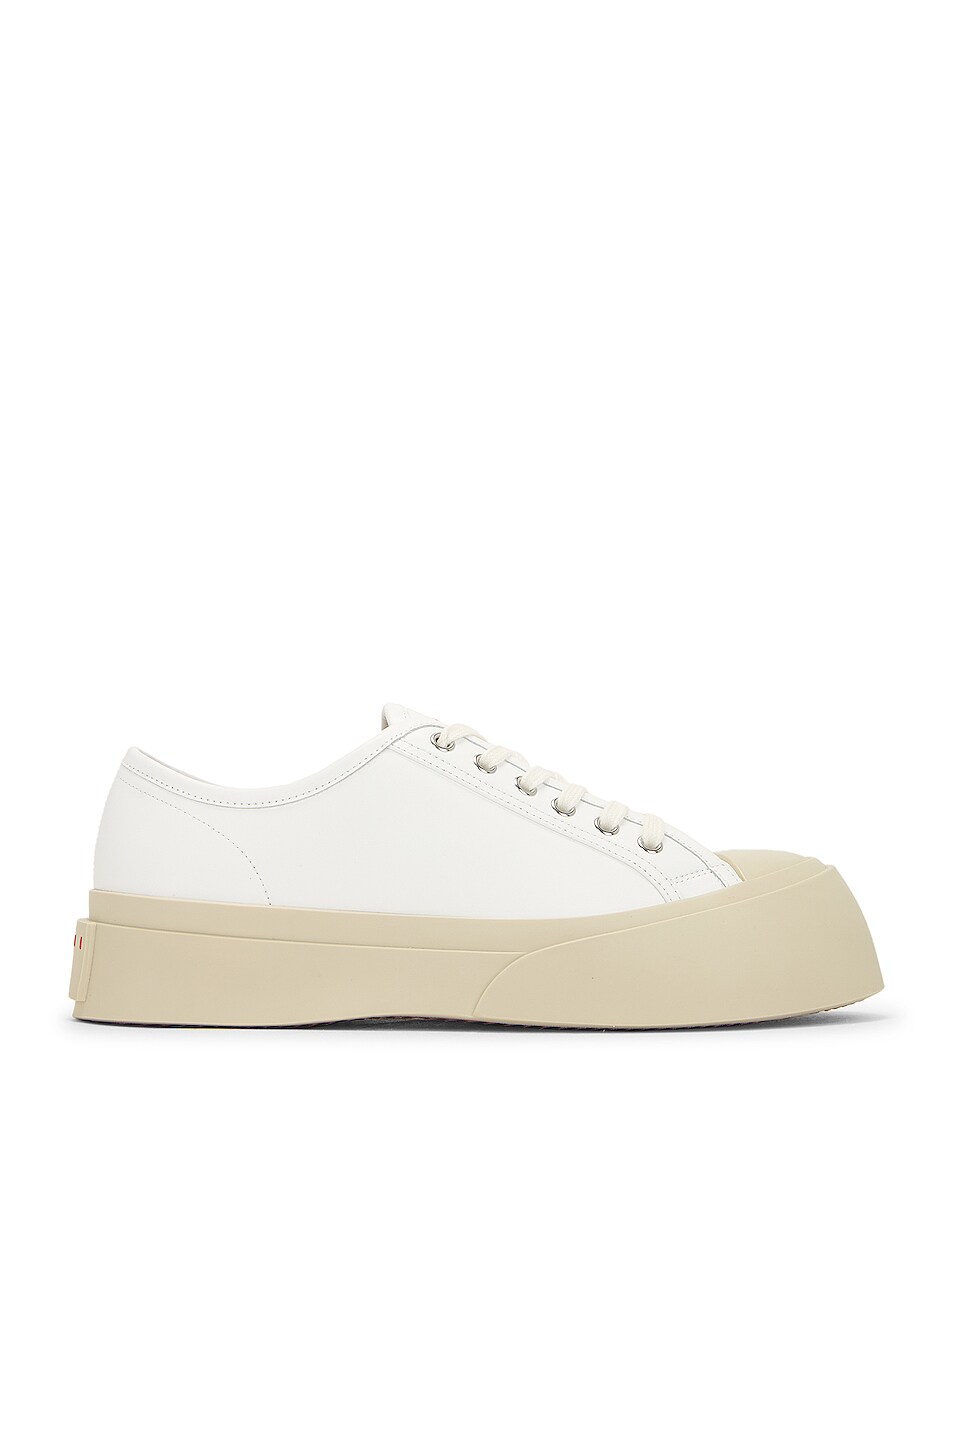 Image 1 of Marni Pablo Lace-Up Sneakers in Lily White